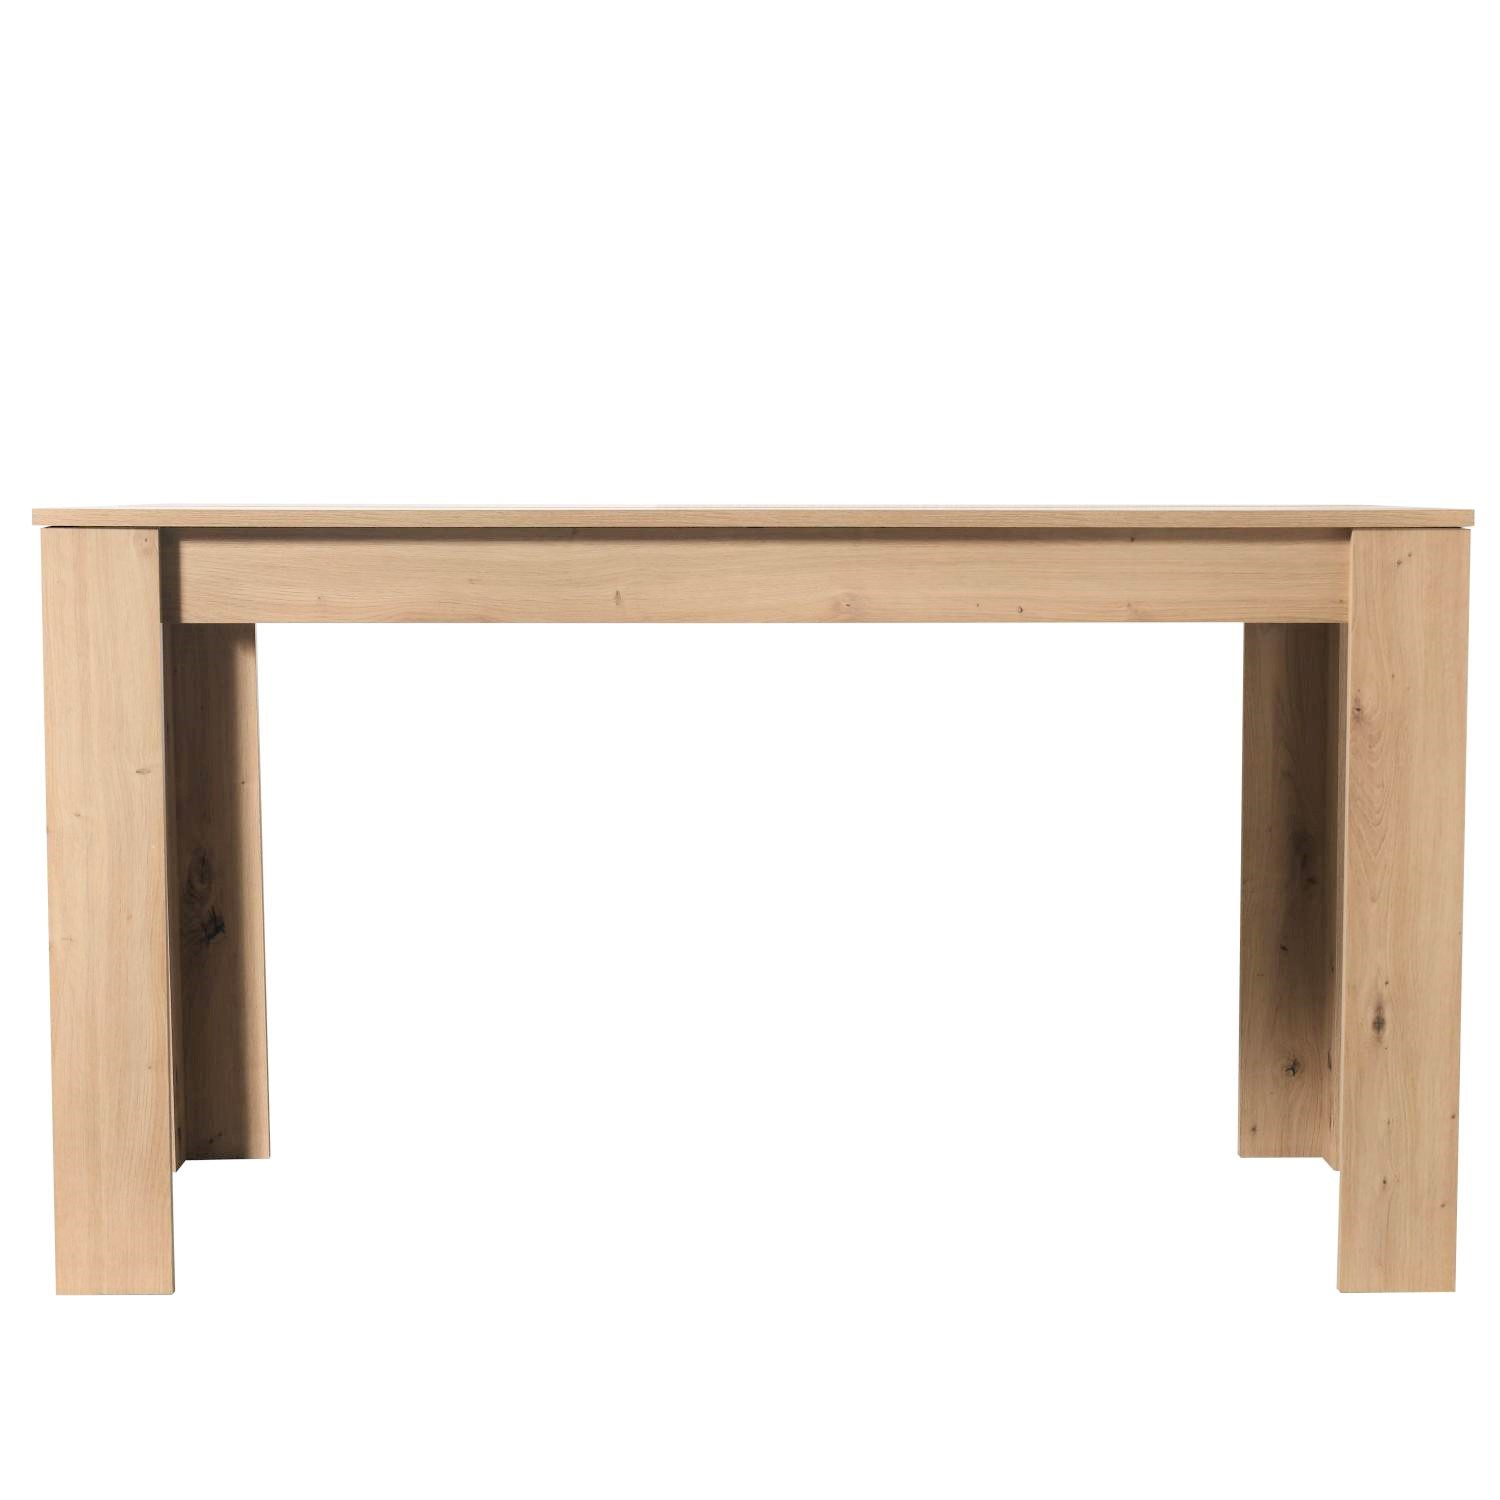 Modern Dining Table Kitchen Table Wooden Table 135x80 cm Oak Black 6 Seater